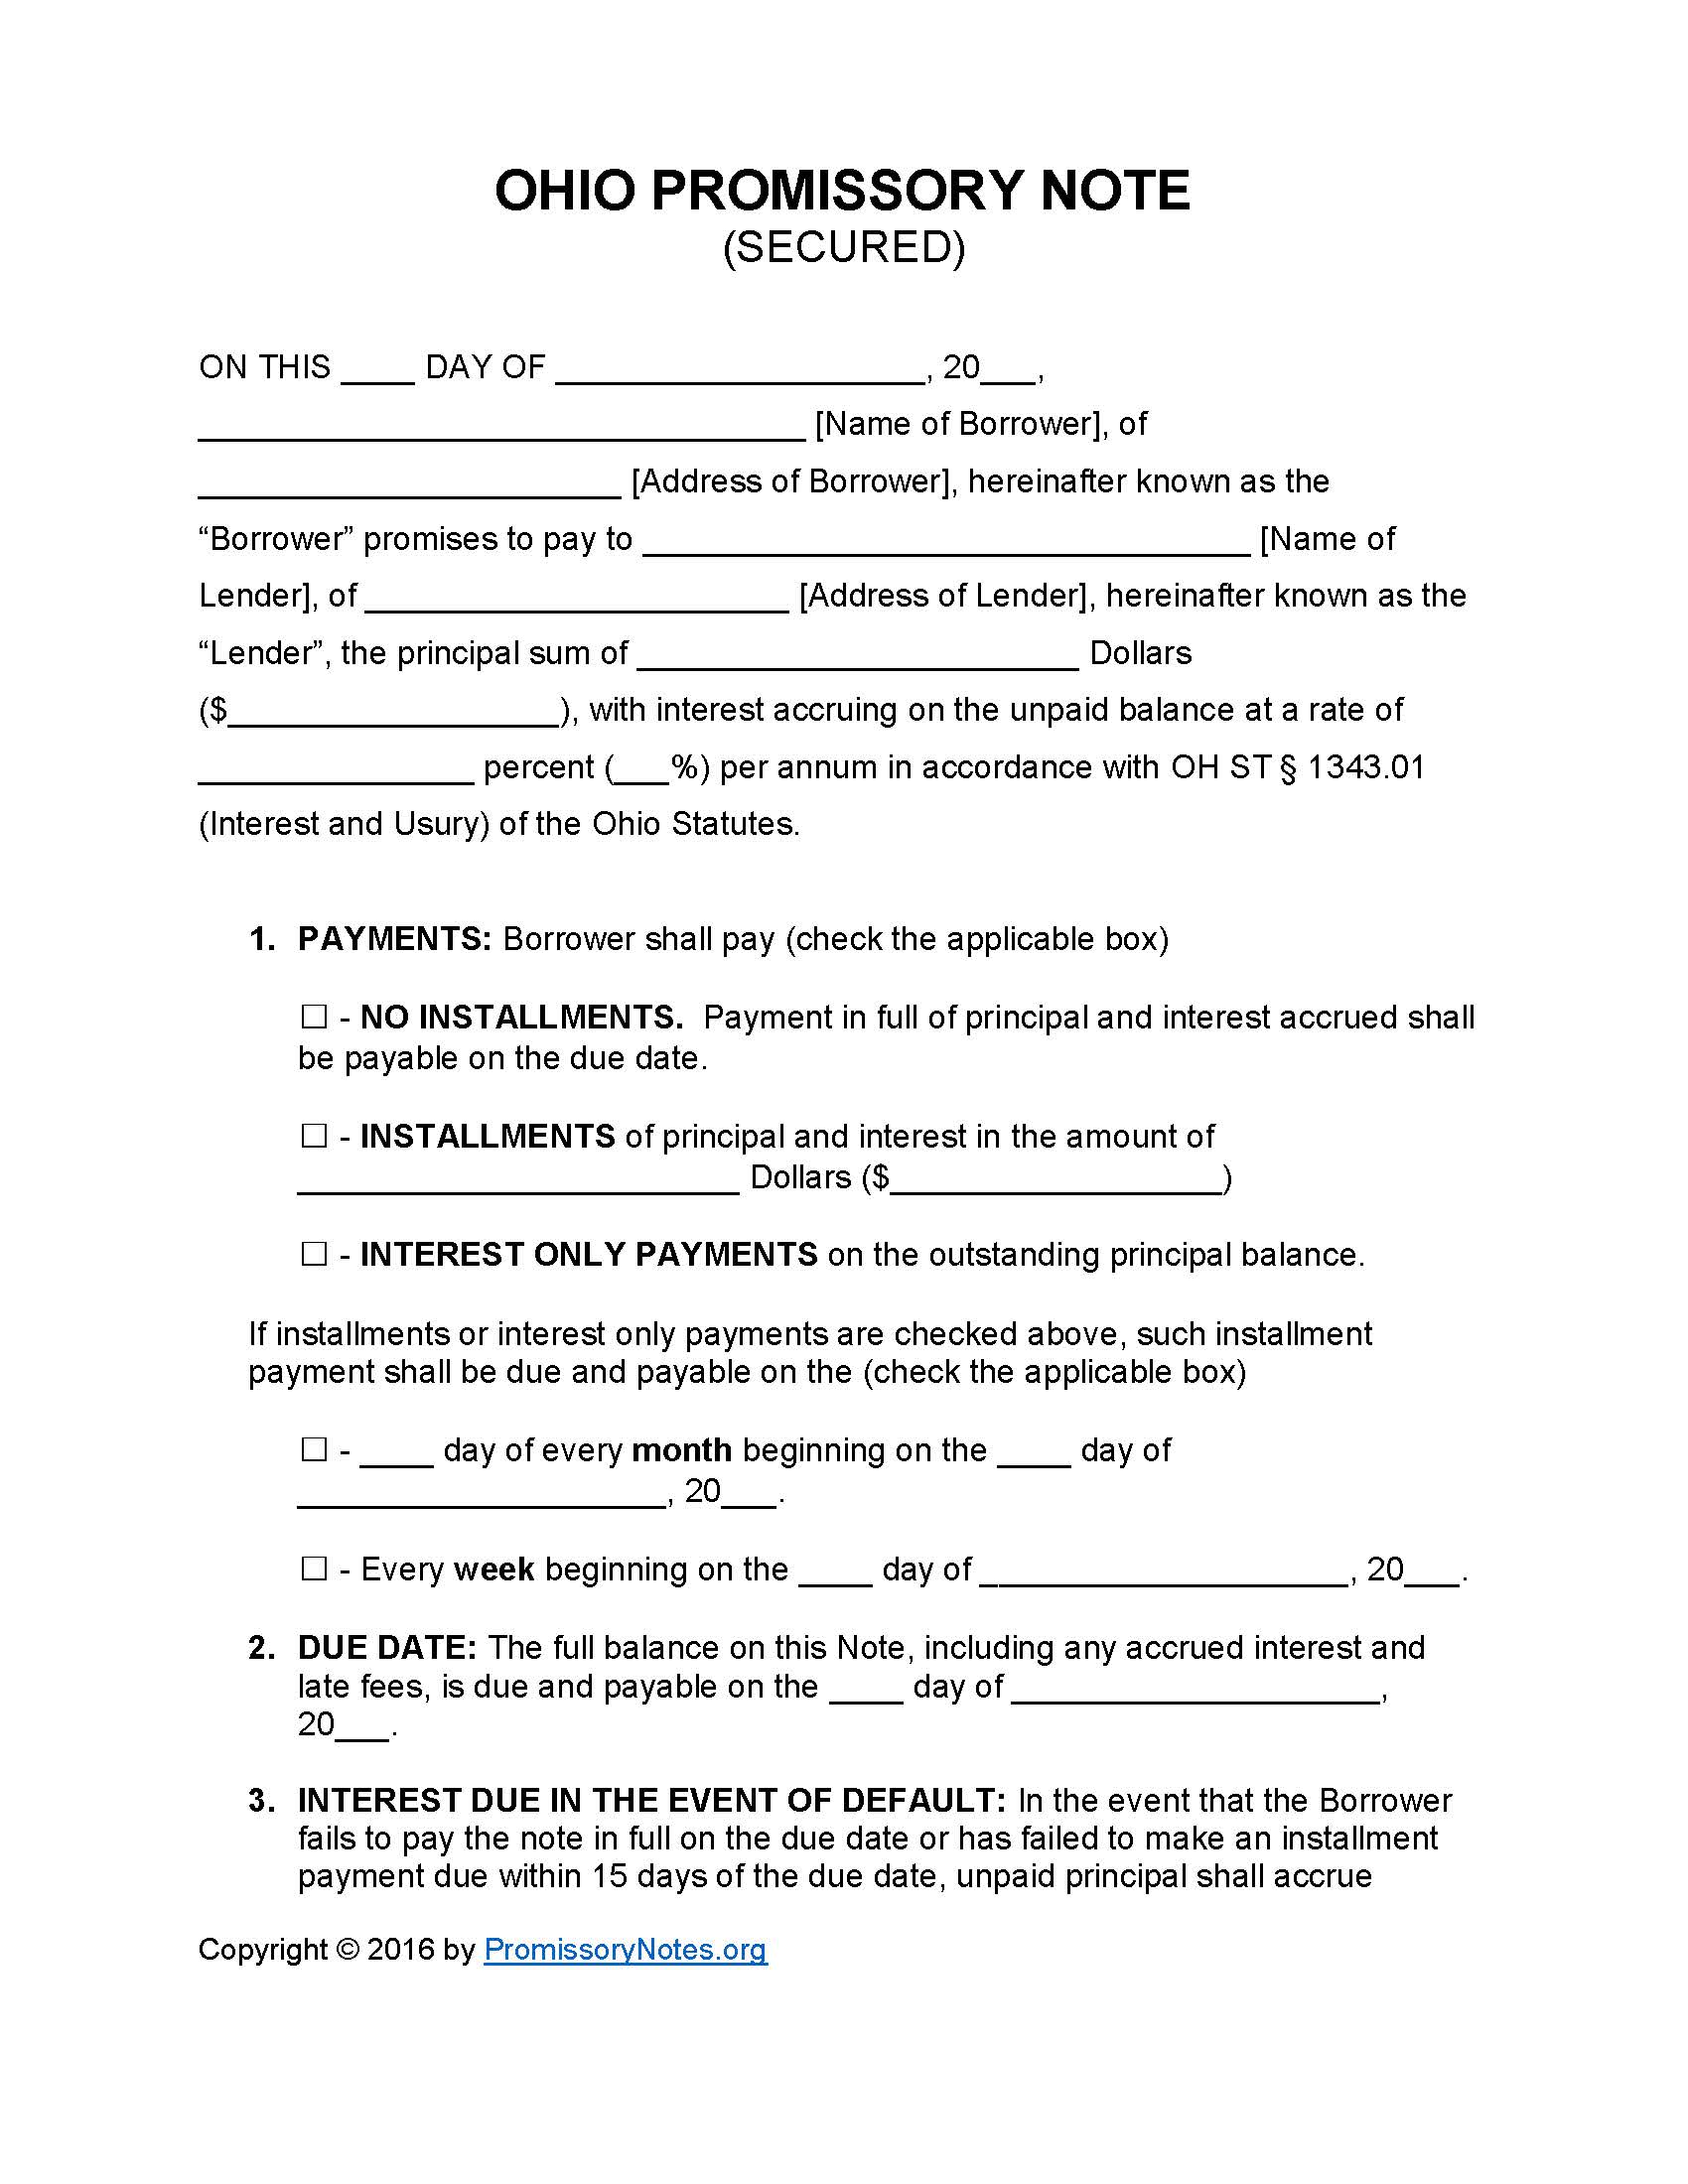 ohio-secured-promissory-note-form